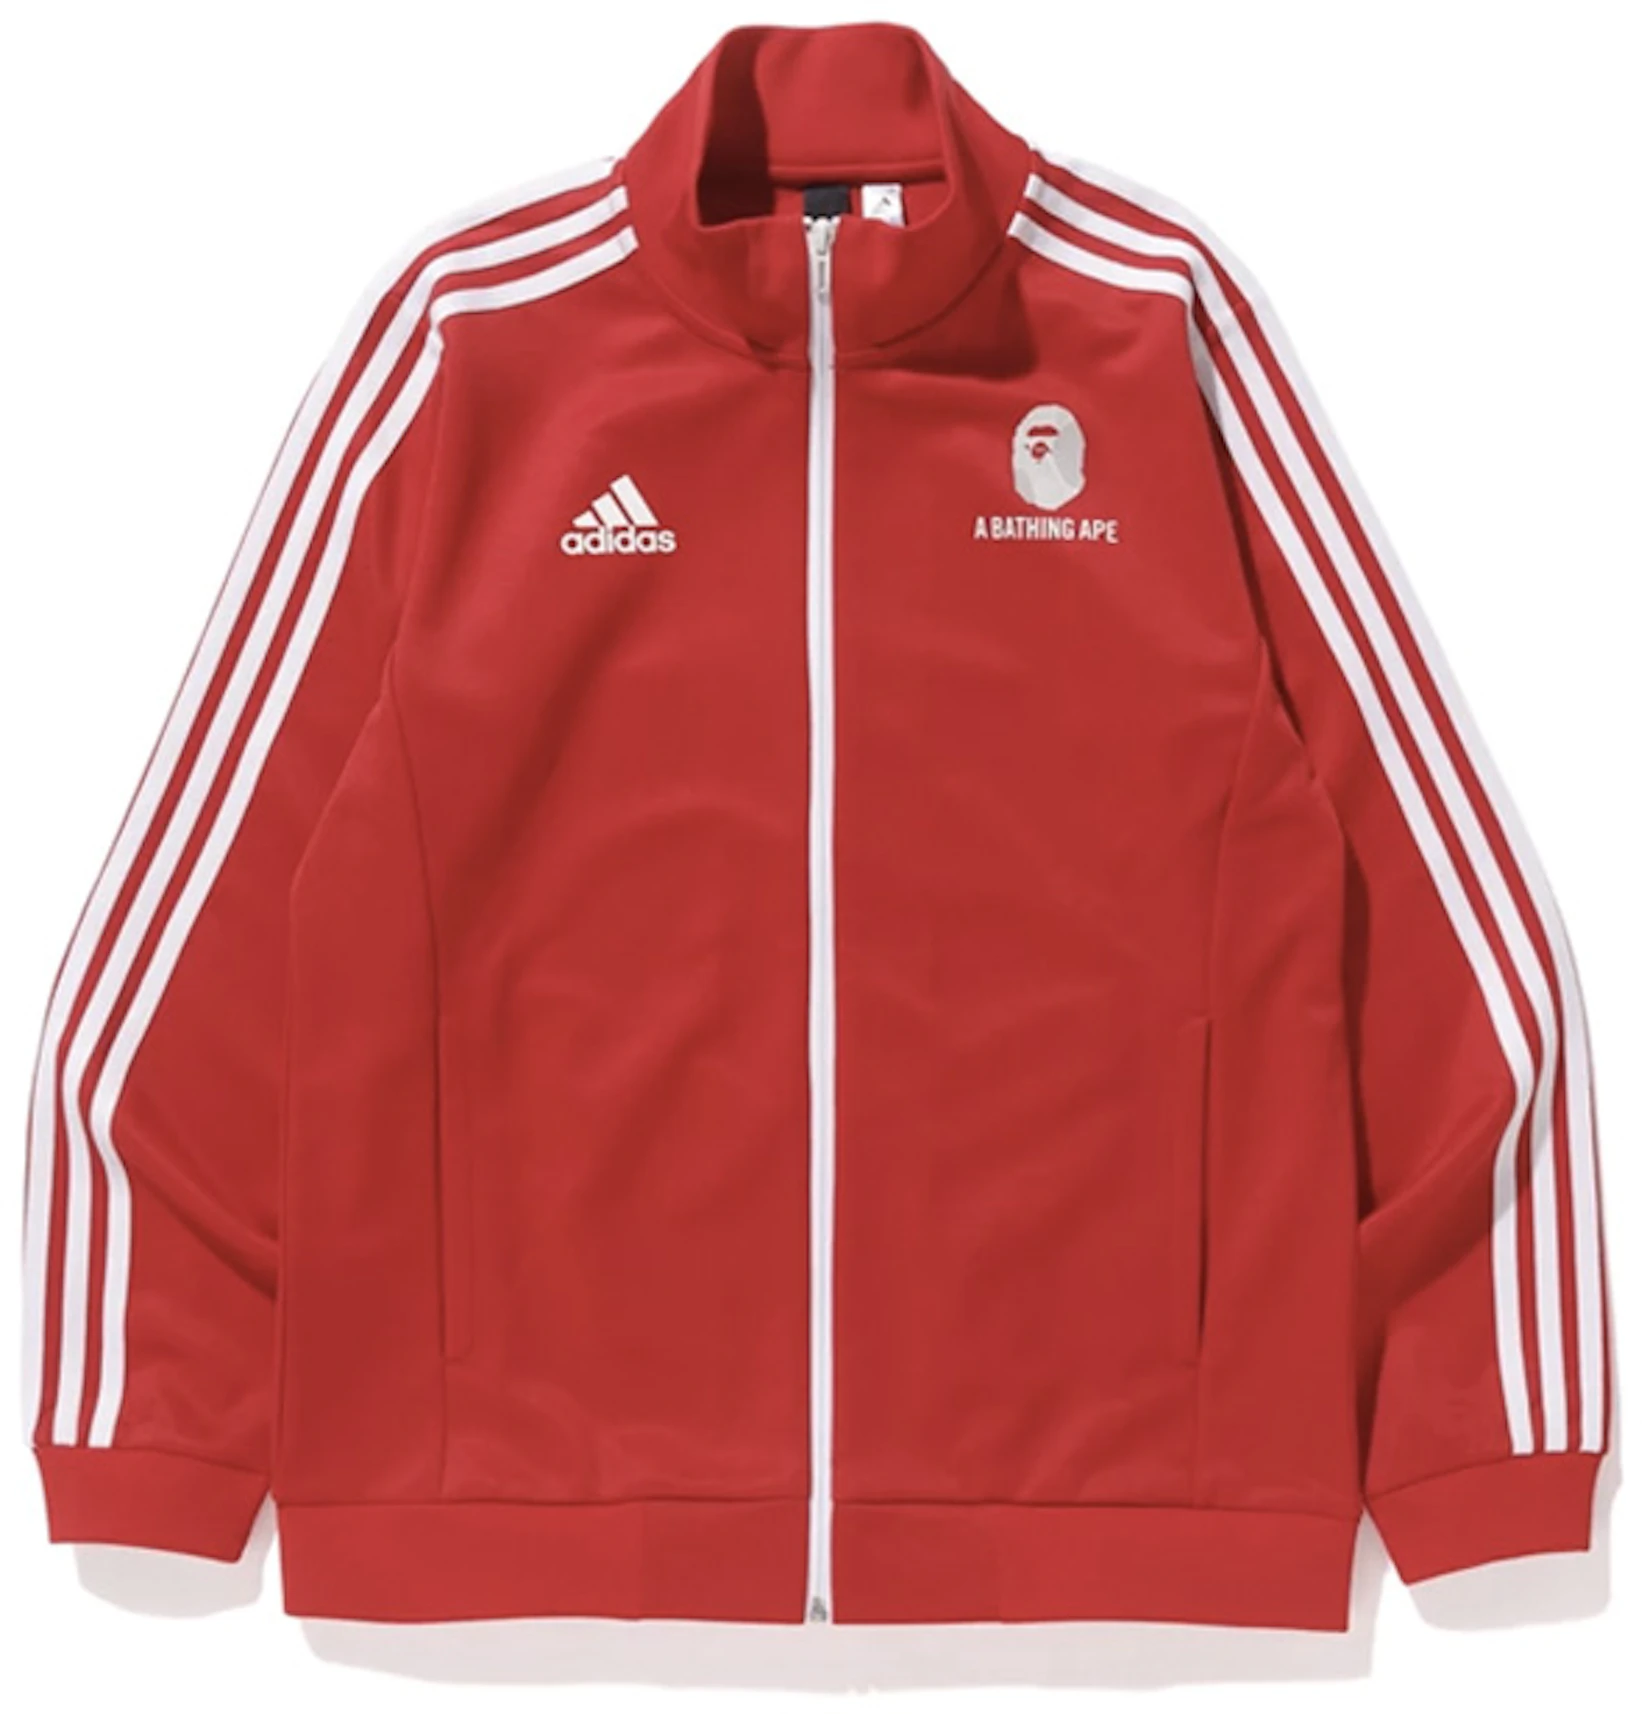 Regreso notificación pared BAPE x adidas World Cup 2018 Winning Collection Zip Up Track Jacket Red -  SS18 - ES